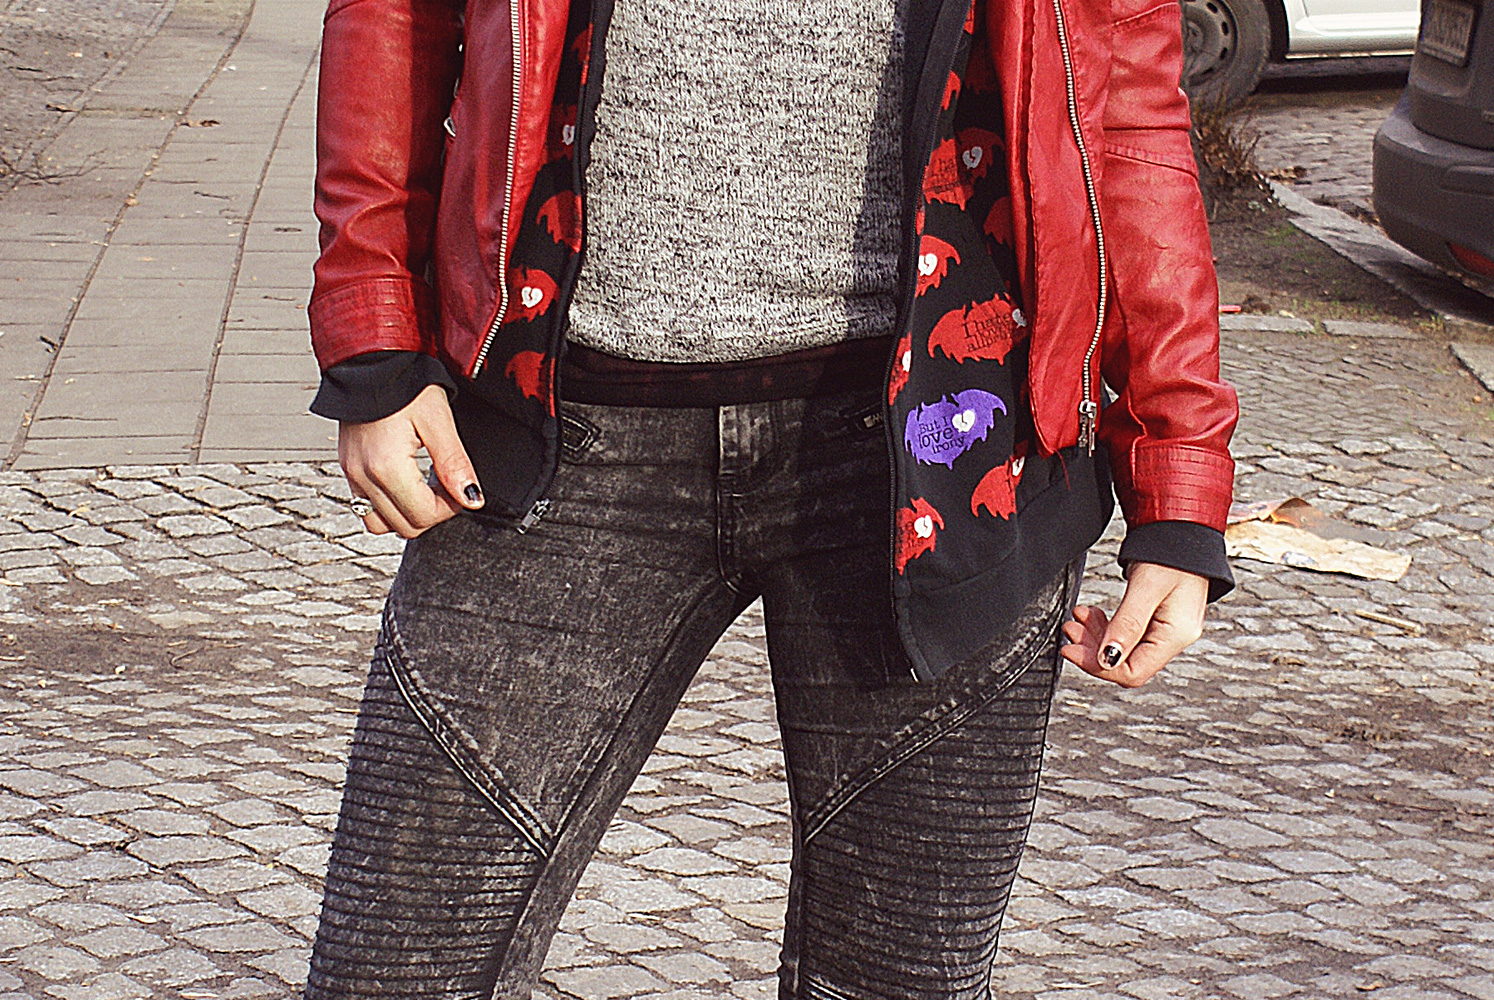 outfit, altfashion, alternative, punk, street, grey, divided, h&m, moto, jeans, biker, boots, street super shoes, sacha, clandestine industries, fall out boy, pete wentz, i love irony, creepers, underground, creeper, rot, red, lederjacke, beanie, nieten, spikes, winter, strick, herbst, knit, all over